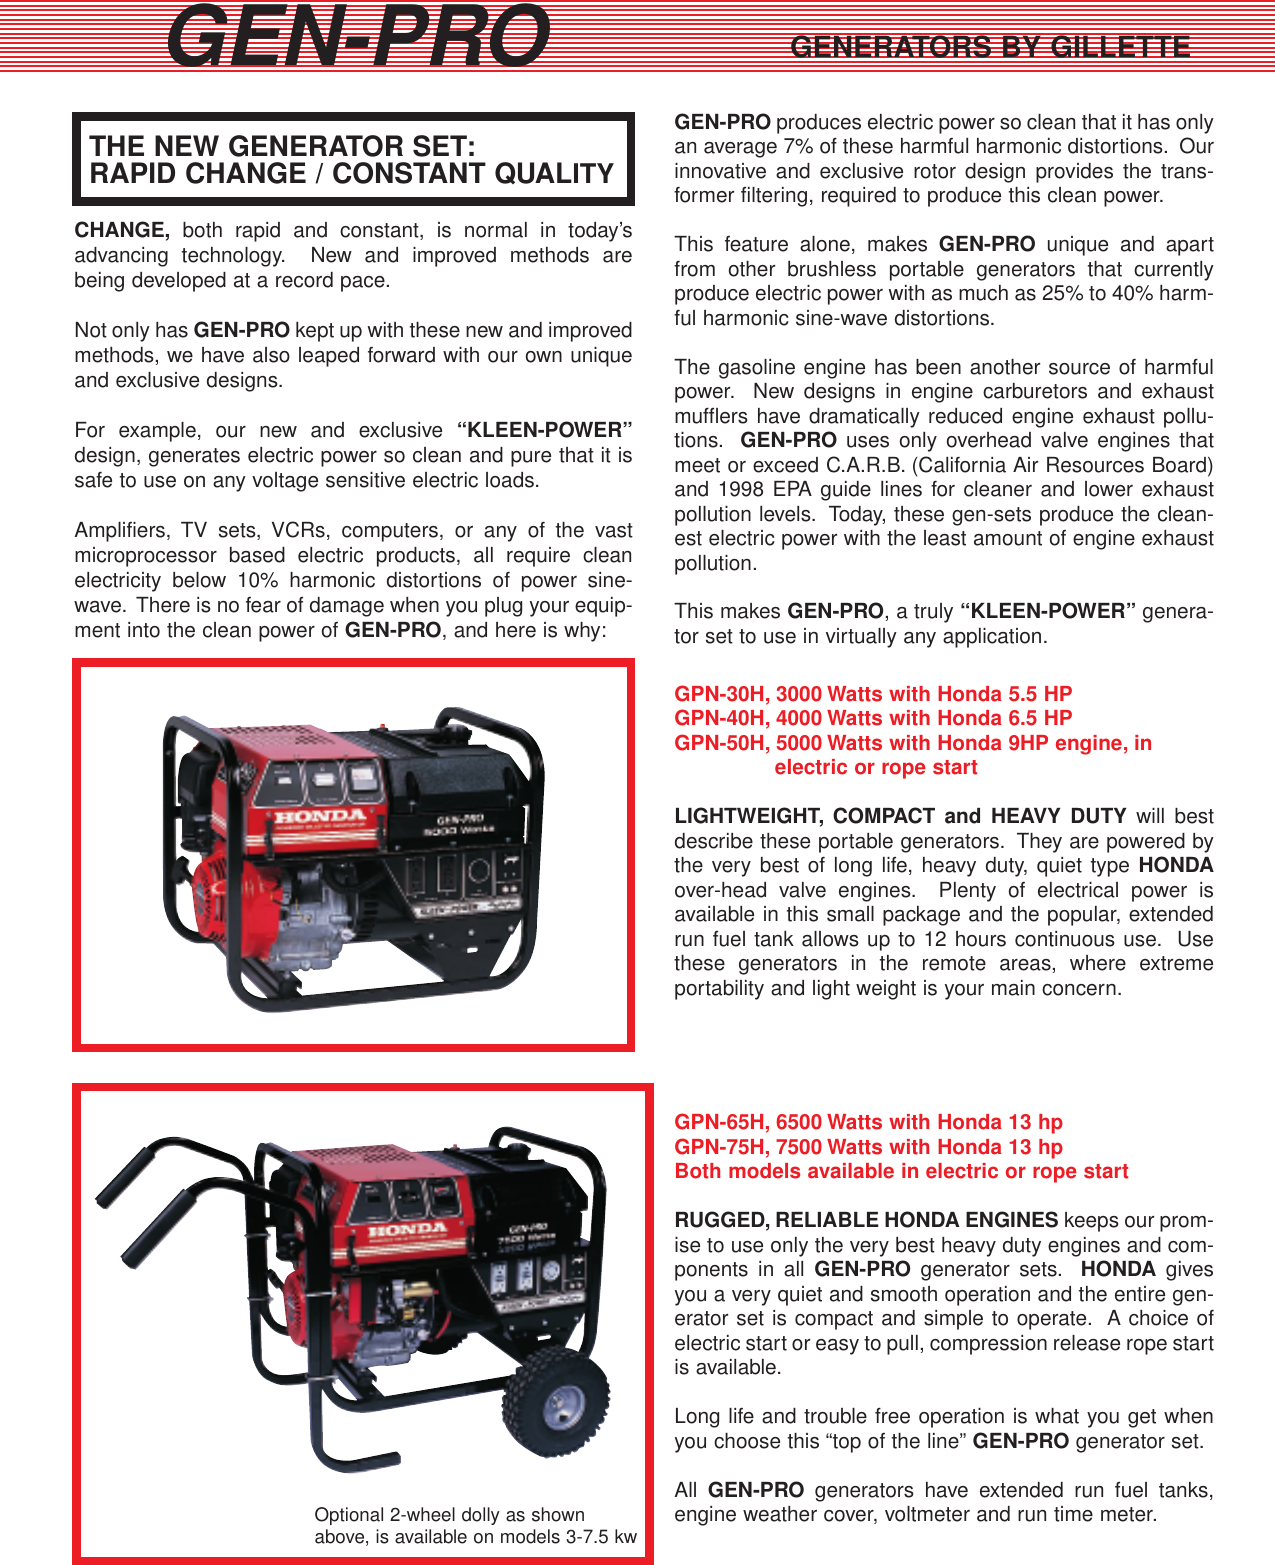 Page 2 of 6 - Gillette Gillette-Portable-Generators-Users-Manual- Gen-Pro 2  Gillette-portable-generators-users-manual